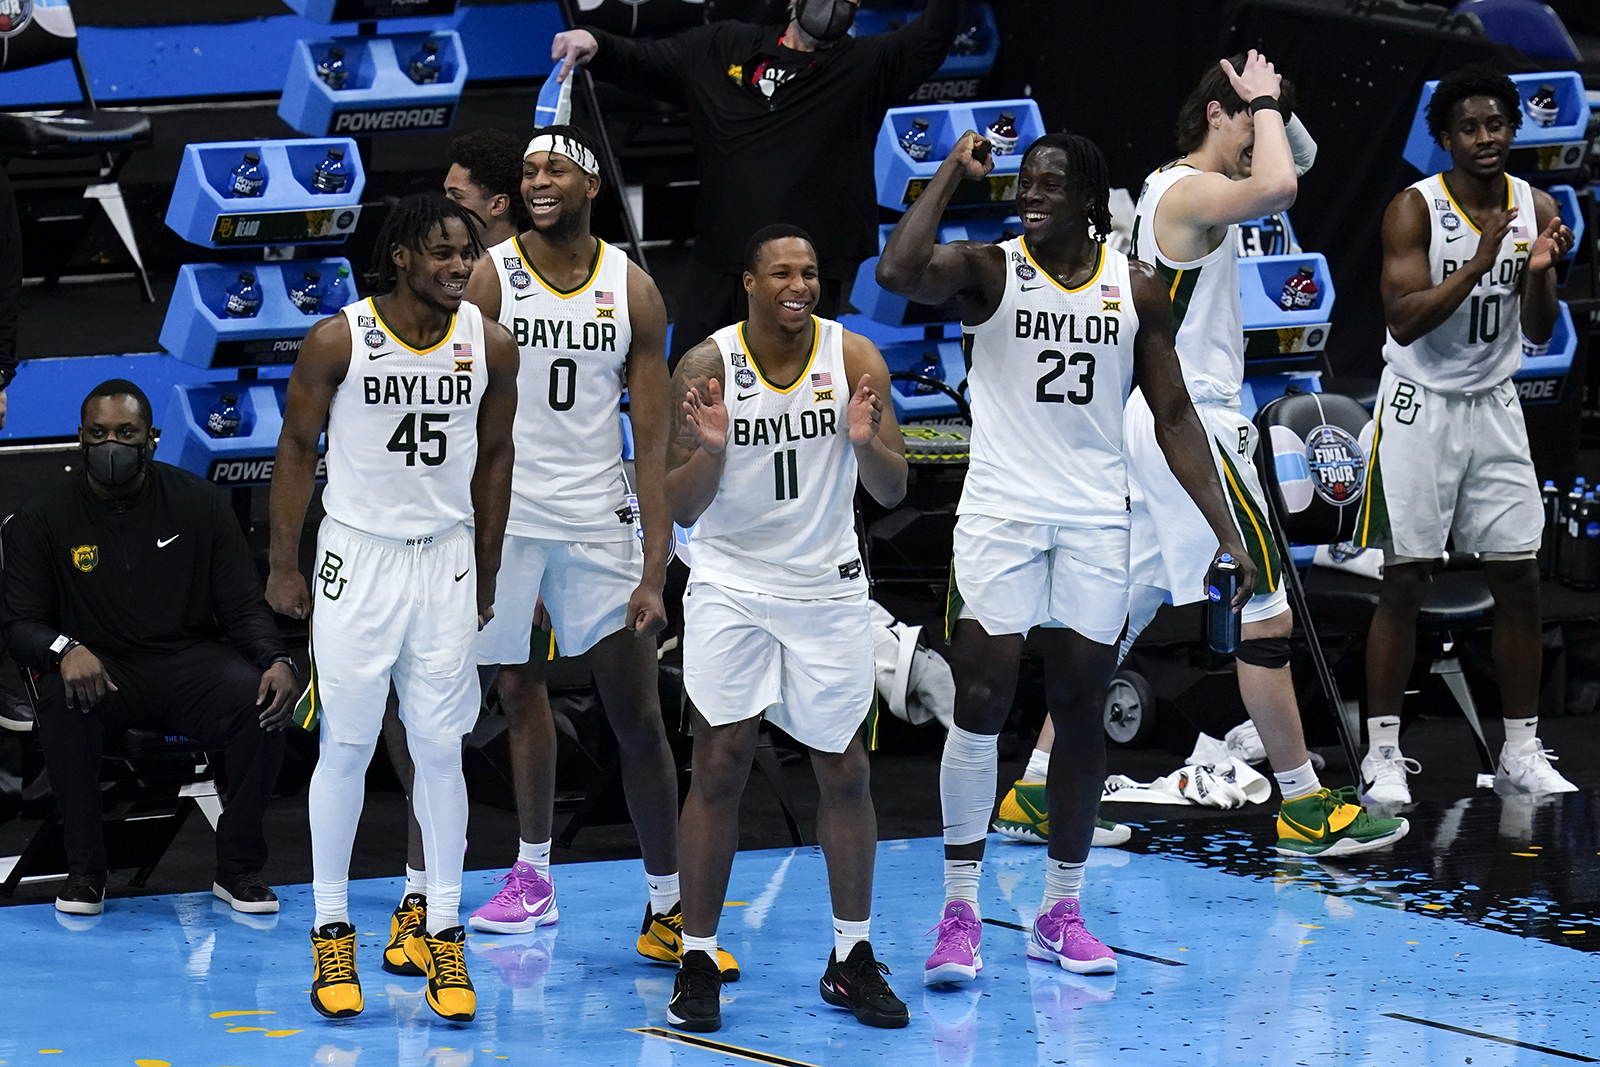 Baylor players celebrate at the end of a men's Final Four NCAA college basketball tournament semifinal game against Houston, Saturday, April 3, 2021, at Lucas Oil Stadium in Indianapolis. Baylor won 78-59. (AP Photo/Michael Conroy)